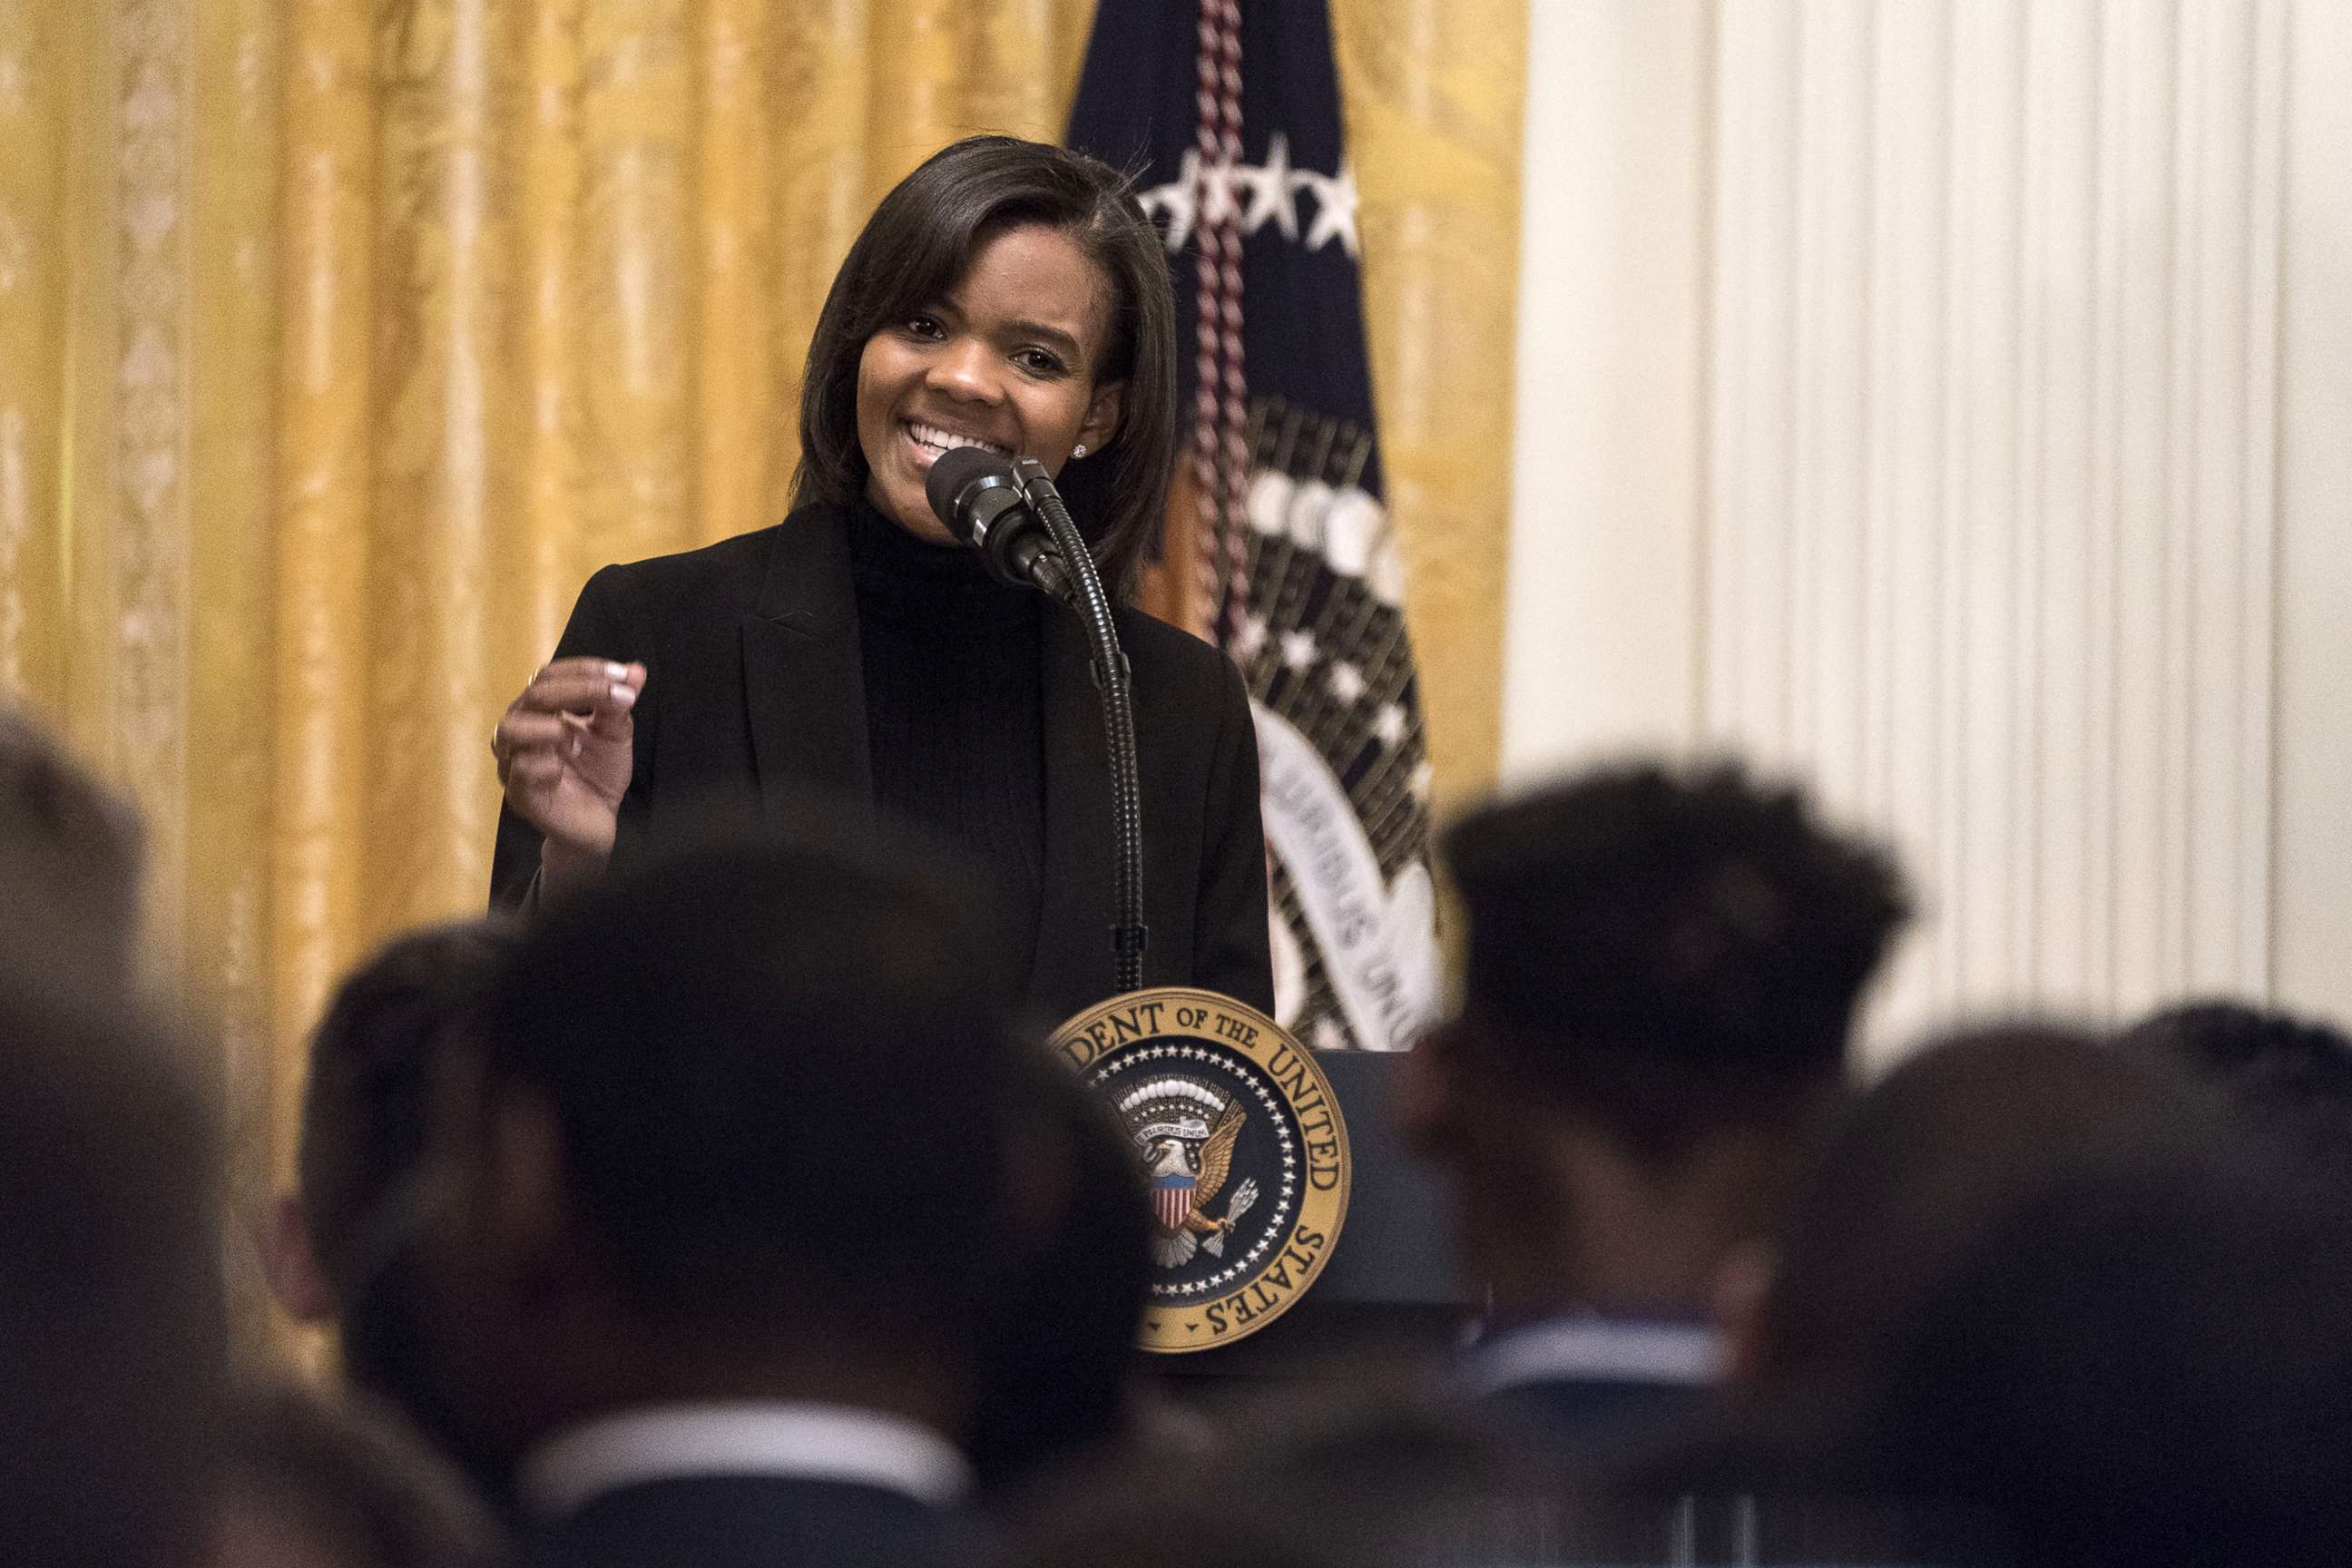 PHOTO: Political commentator Candace Owens introduces President Donald Trump, not pictured, during the Young Black Leadership Summit 2019 event in the East Room of the White House in Washington, D.C., Oct. 4, 2019. 